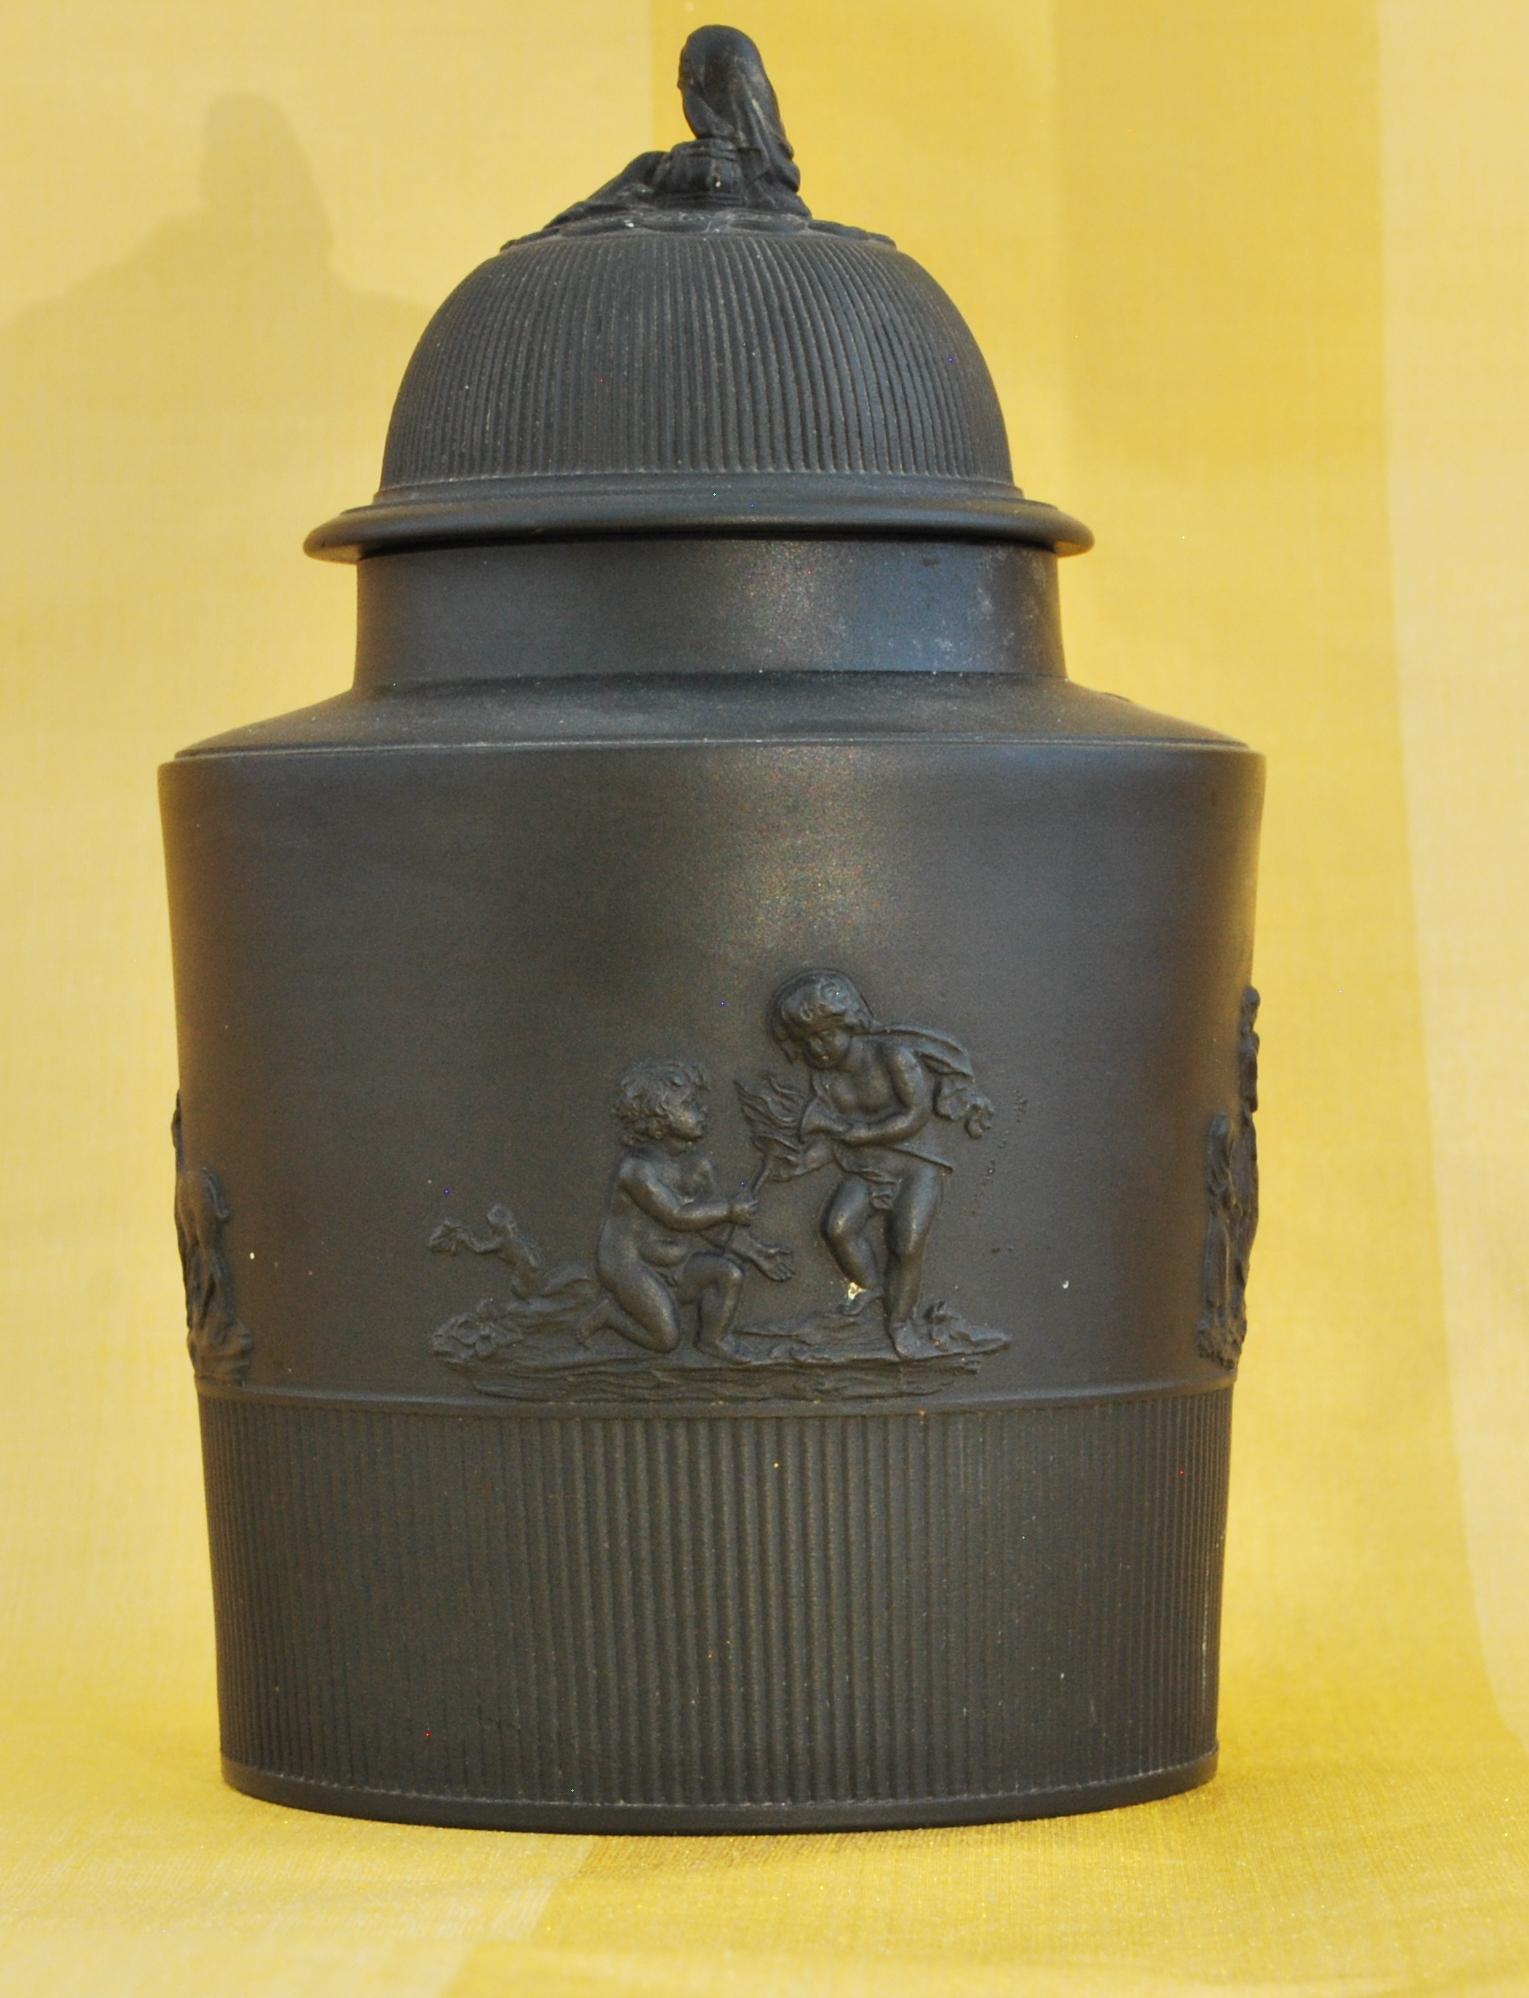 Cyclicrical tea canister in engine-turned black basalt, with raised decoration. Unmarked, but the quality and finial clinch the attribution.